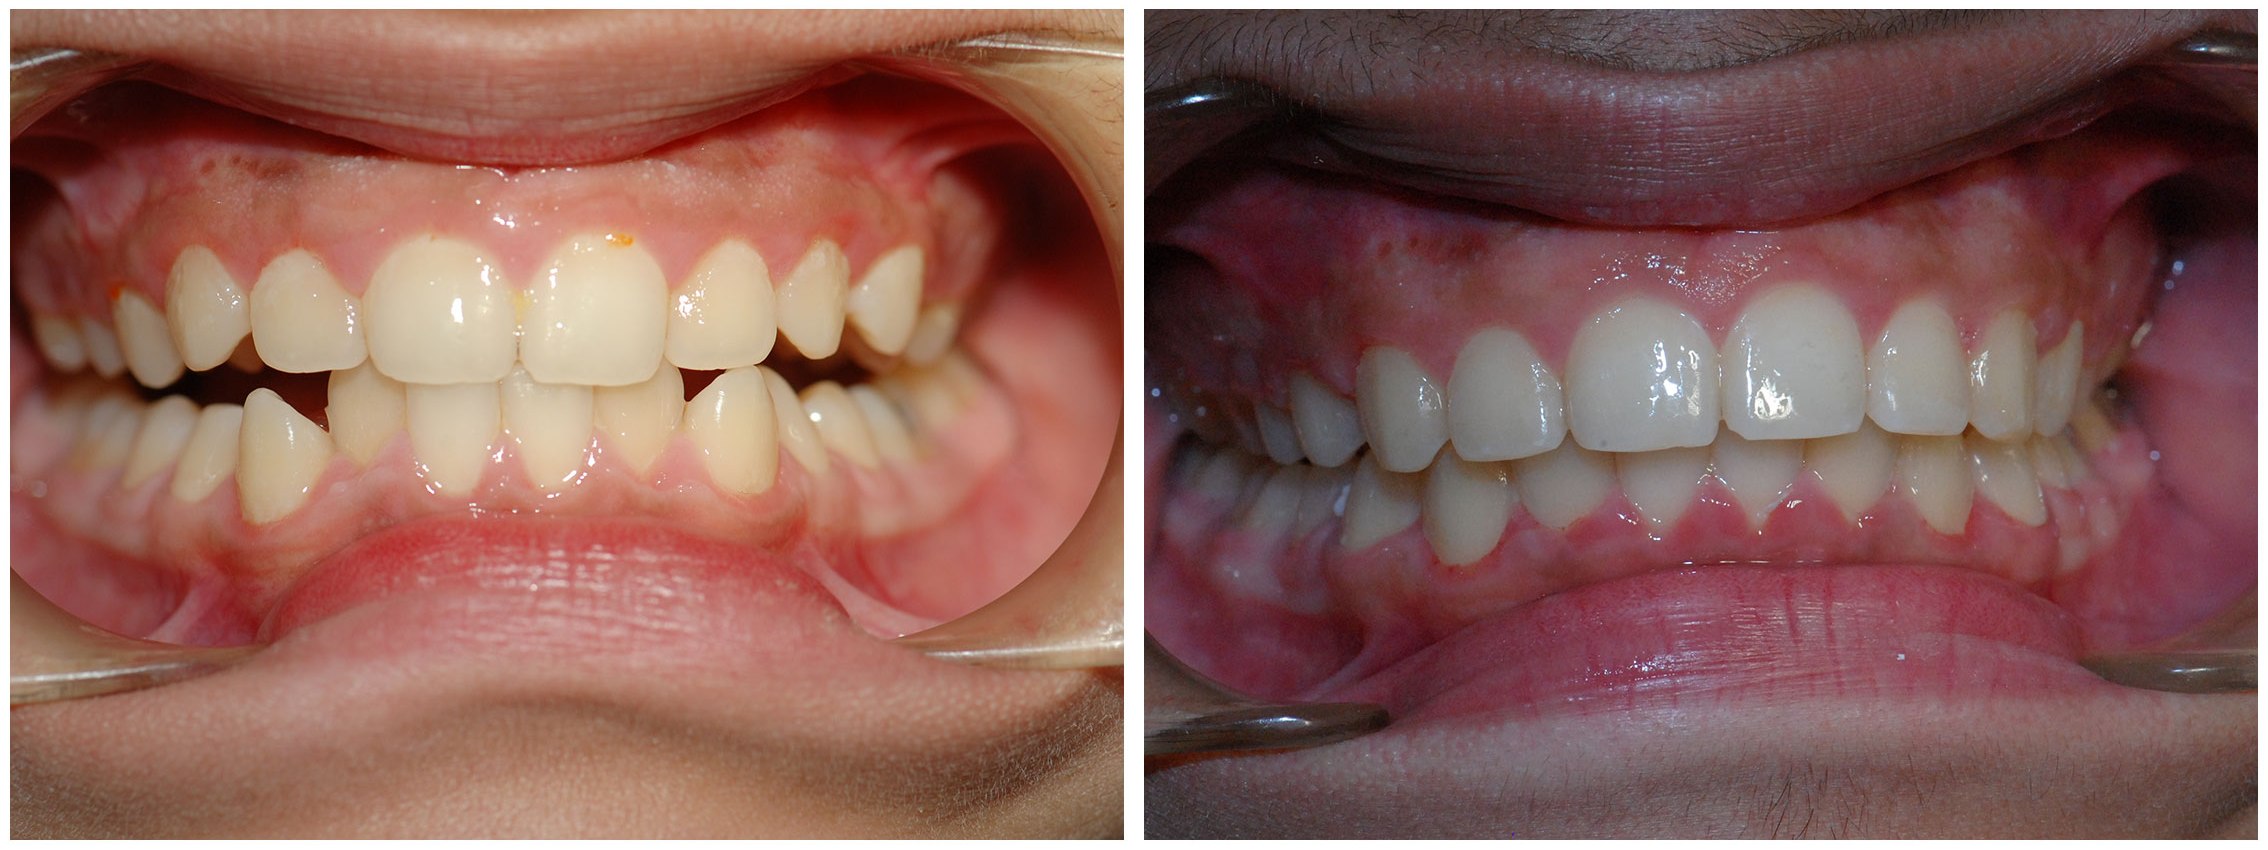 Orthodontic Dental Braces Treatment Before & After